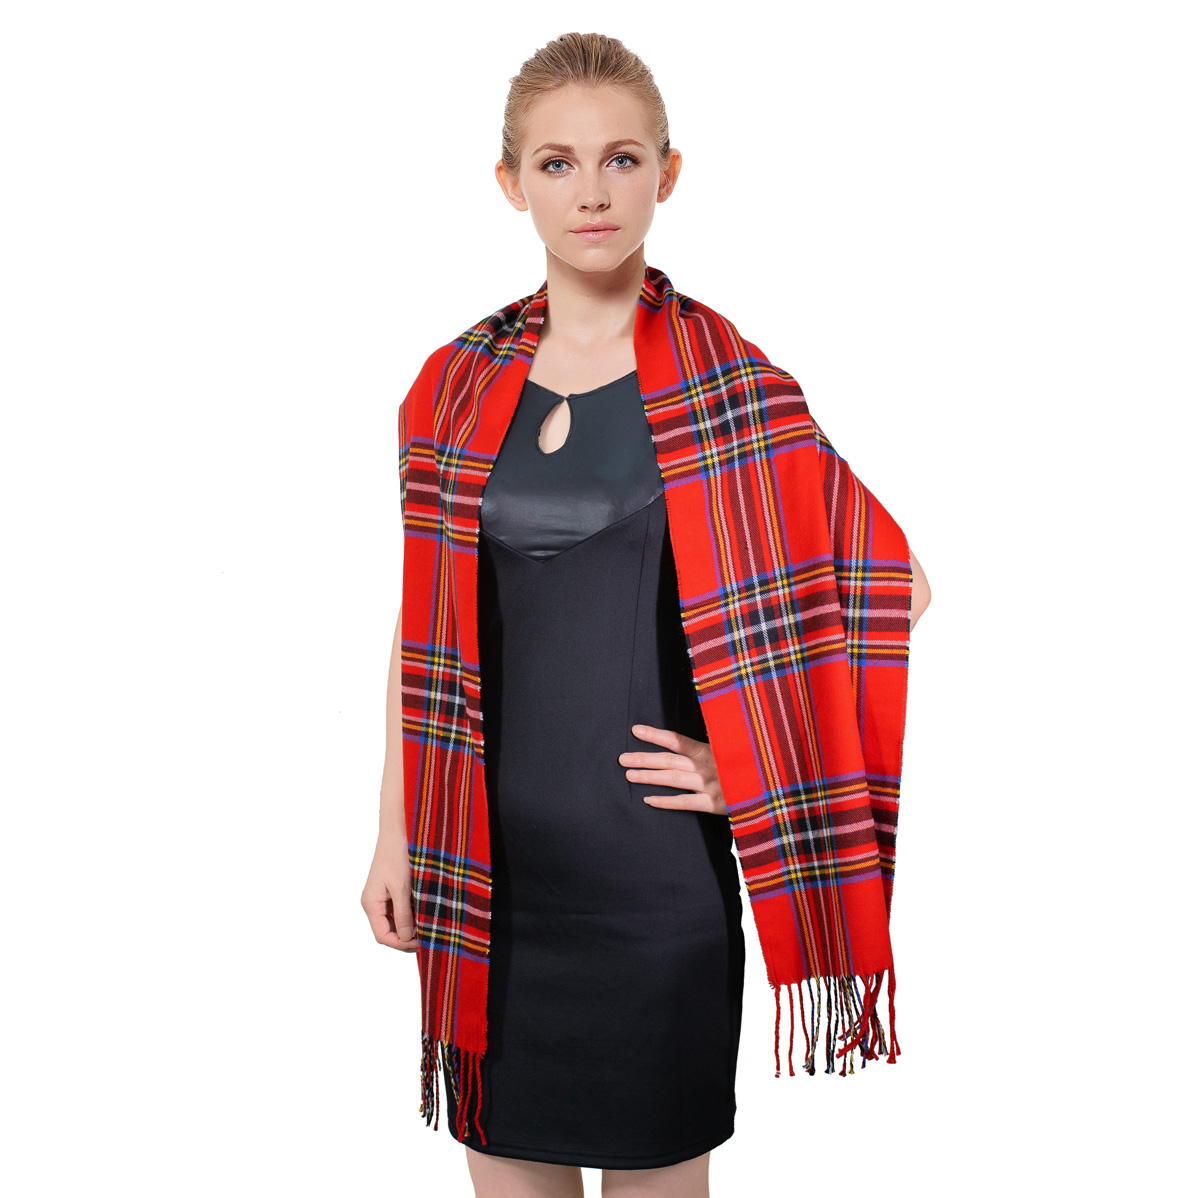 Cashmere Feel Scarf 17-9 Red [17-9] - $3.28 : Wholesale scarves ...